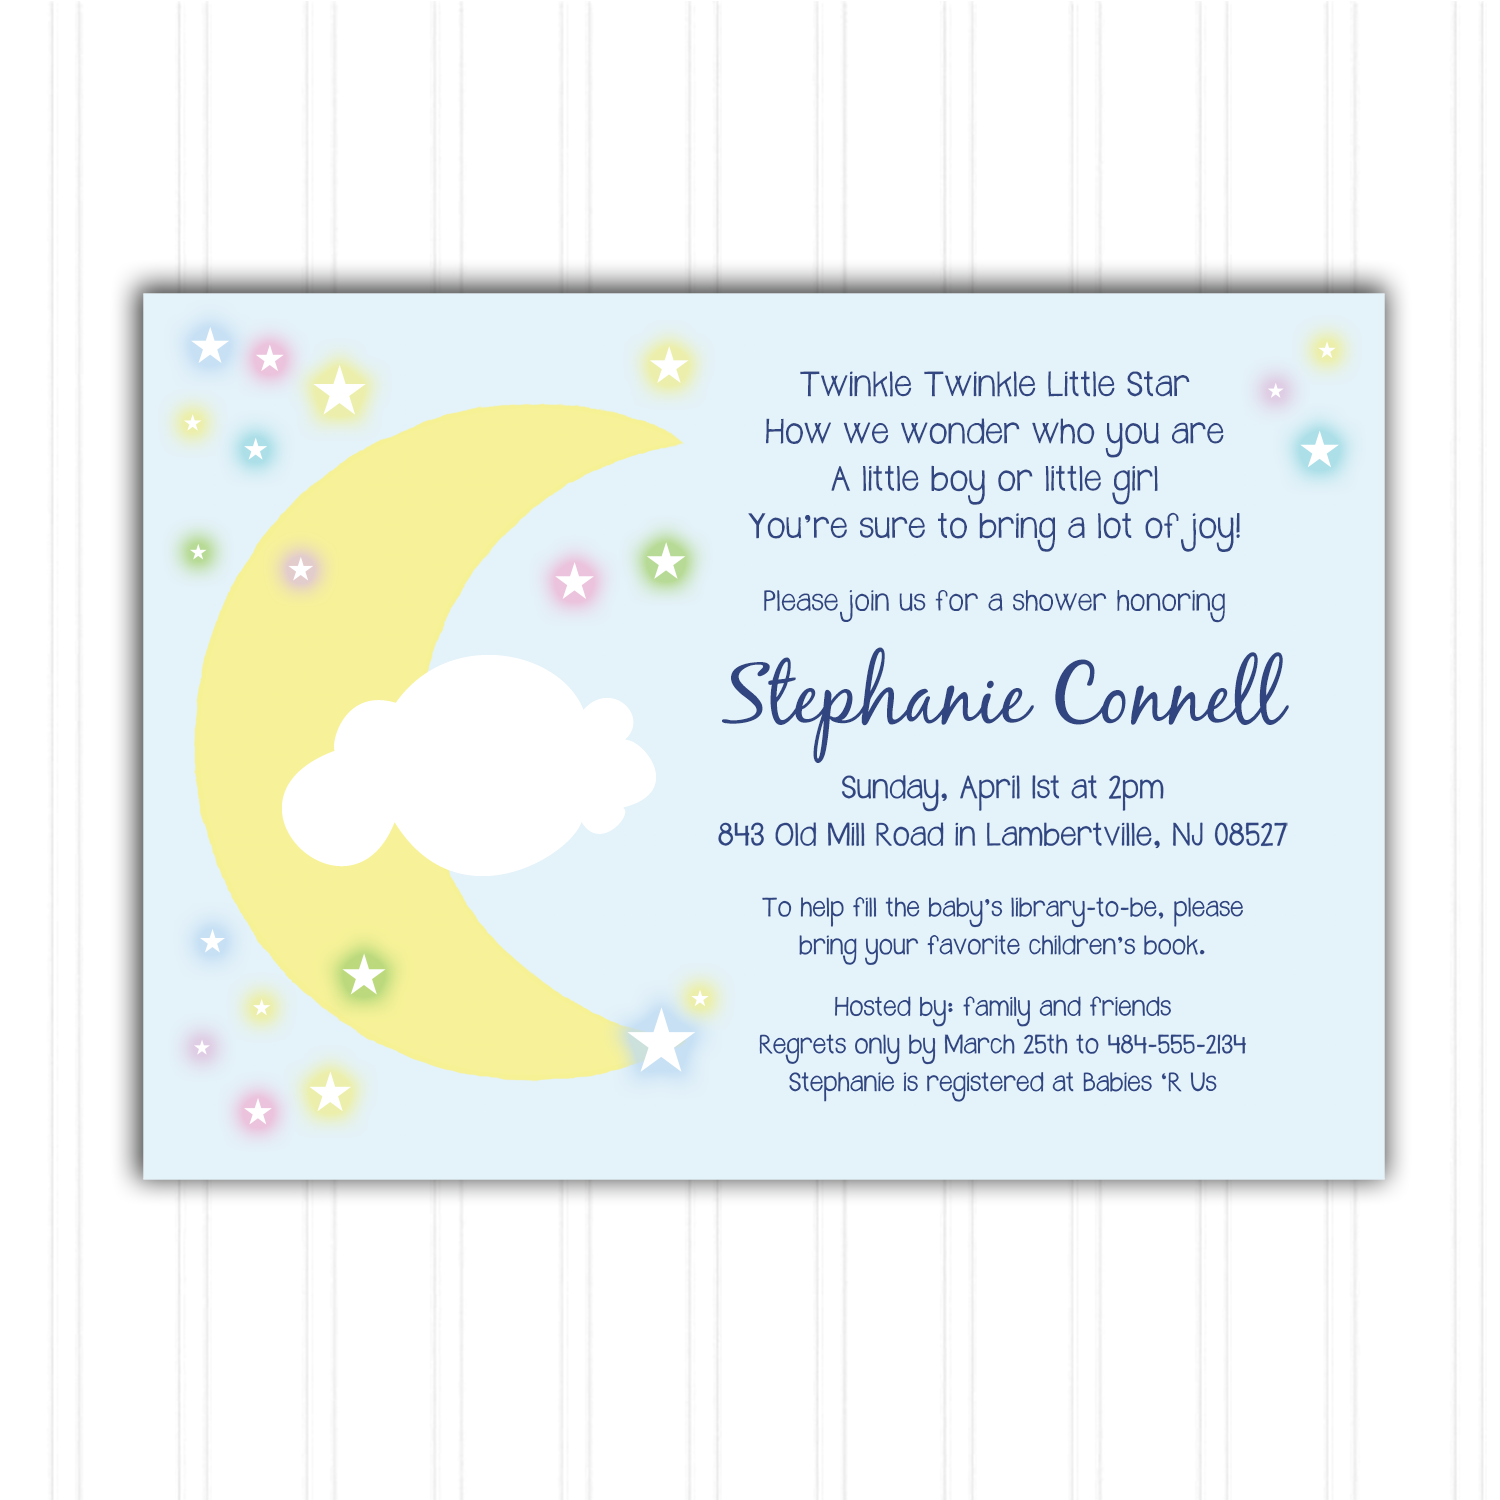 free-printable-baby-shower-invitations-thank-you-card